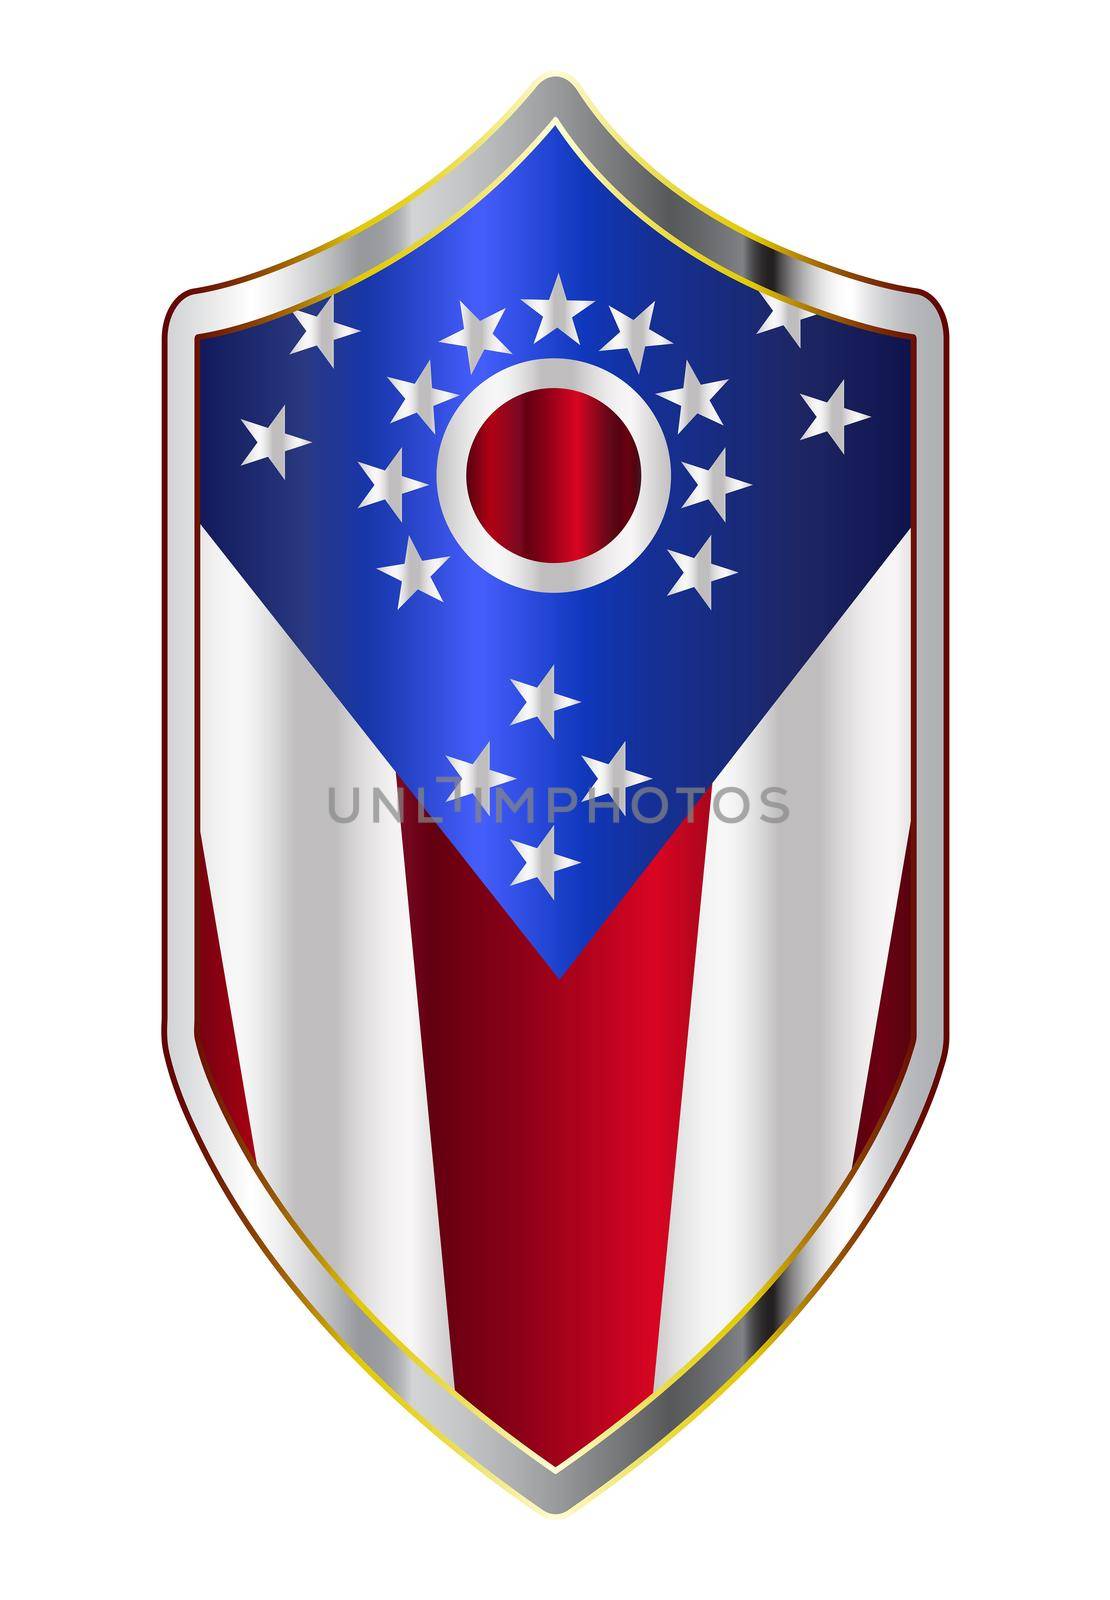 A typical crusader type shield with the state flag of Ohio all isolated on a white background